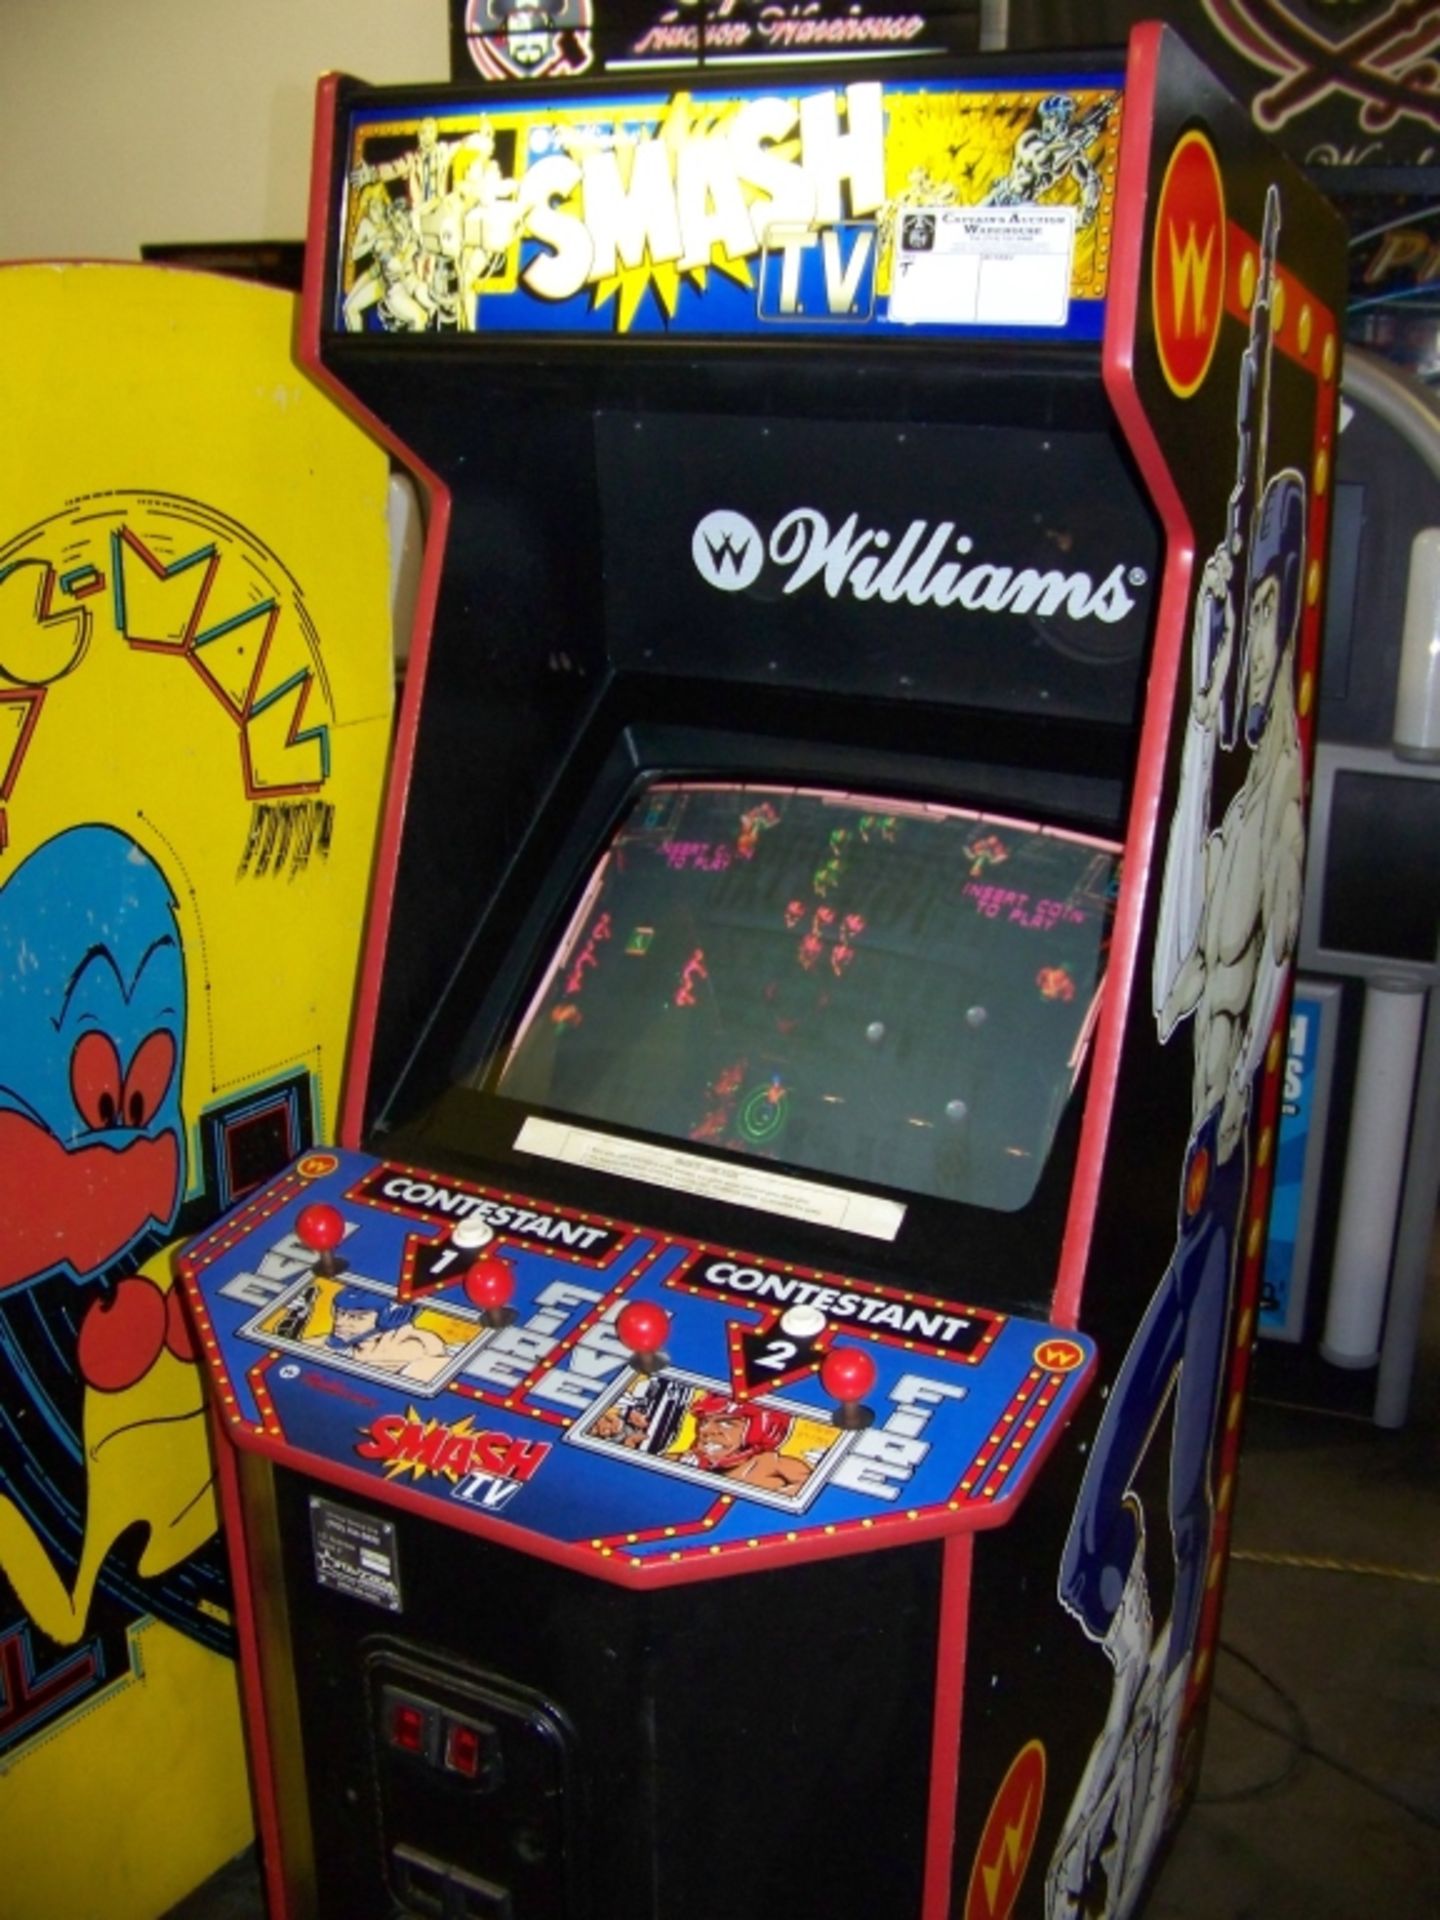 SMASH TV CLASSIC ARCADE GAME WILLIAMS Item is in used condition. Evidence of wear and commercial - Image 7 of 9